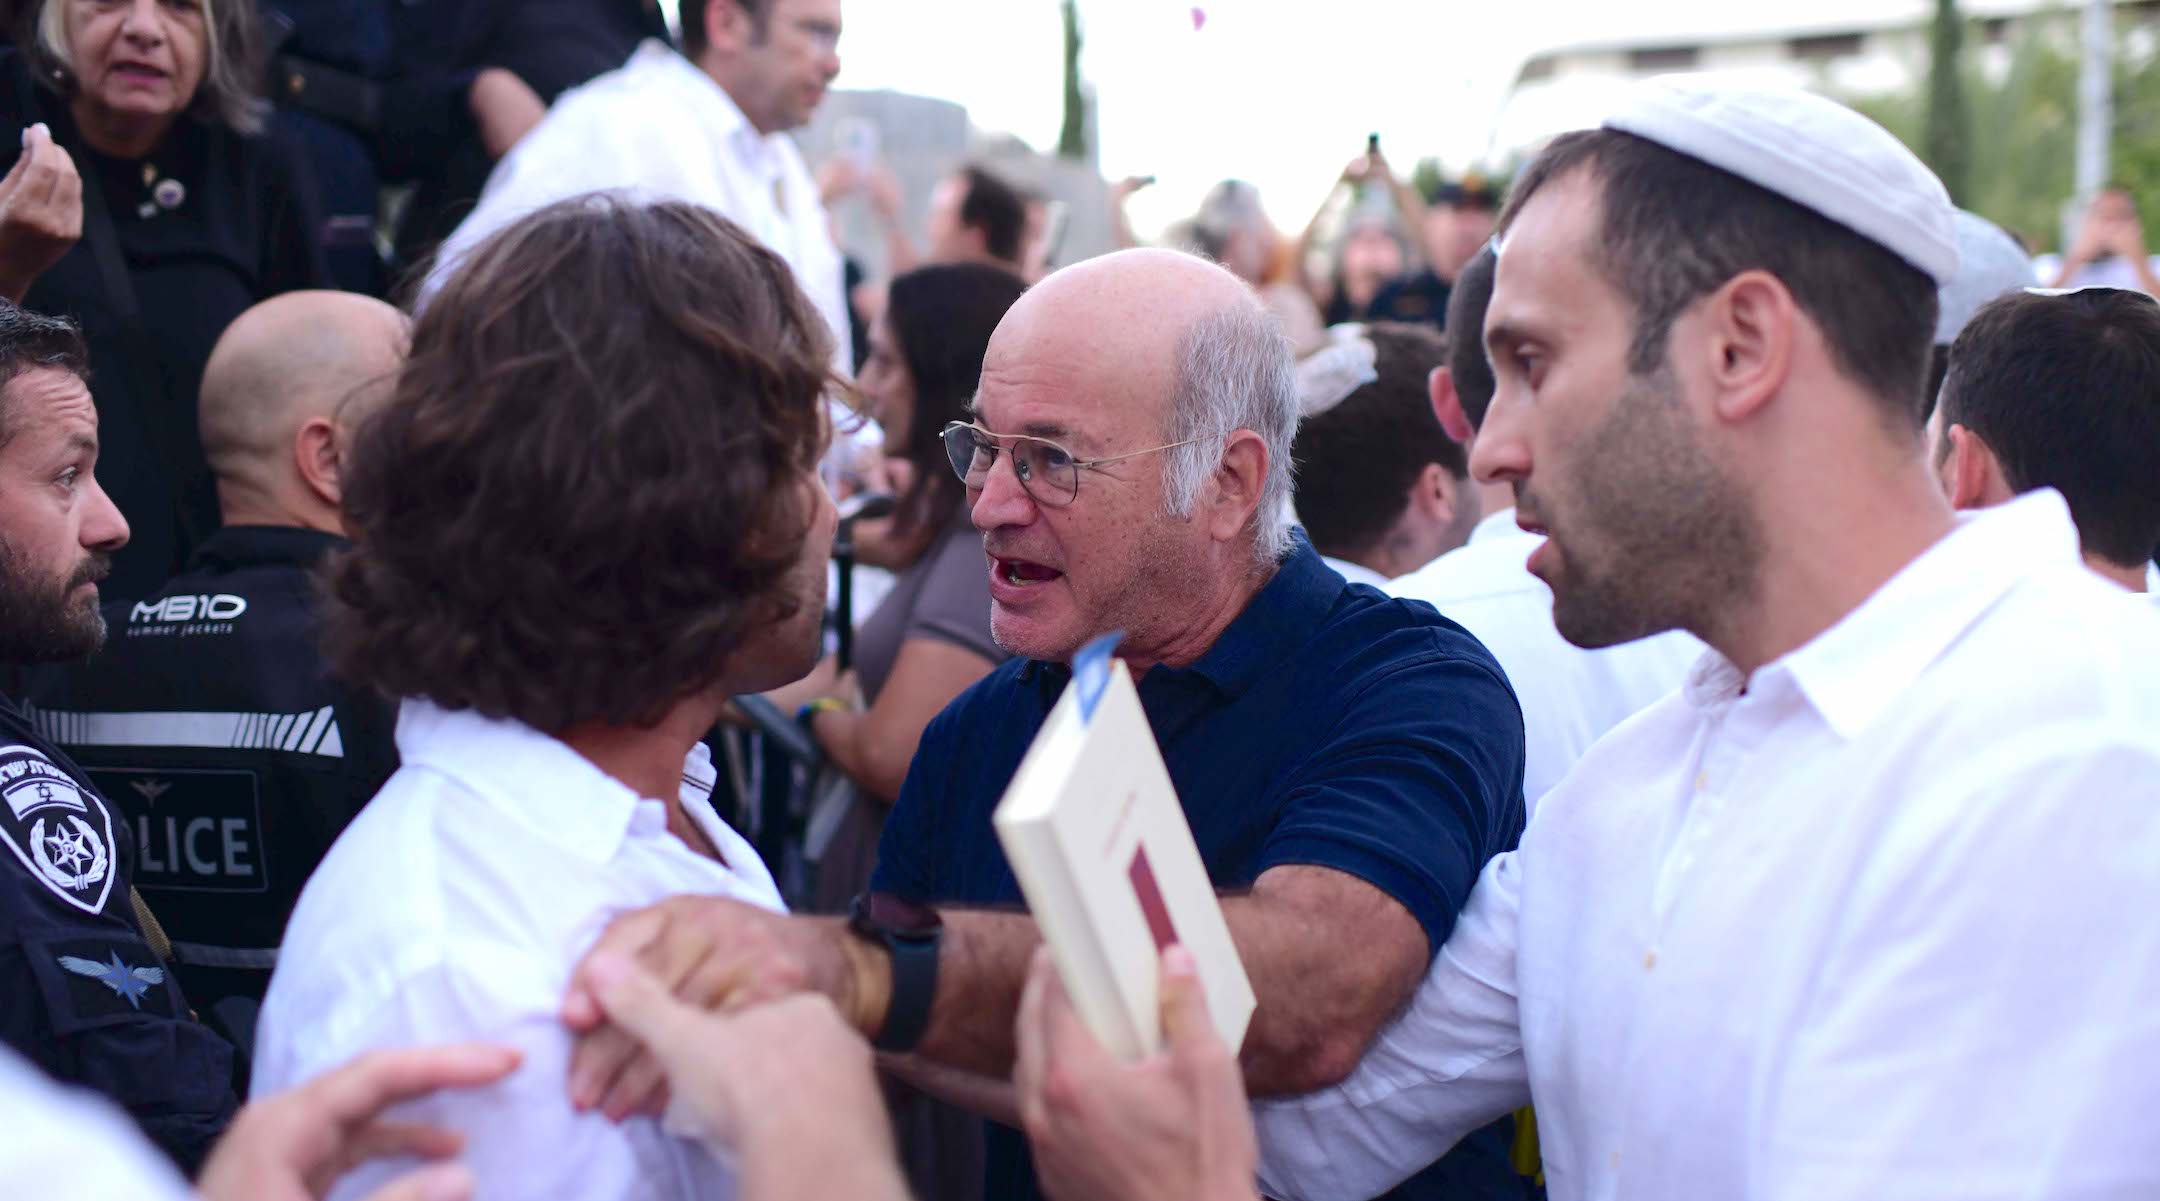 Street fights over prayer offer liberal Israelis a chance to define a Judaism they can believe in